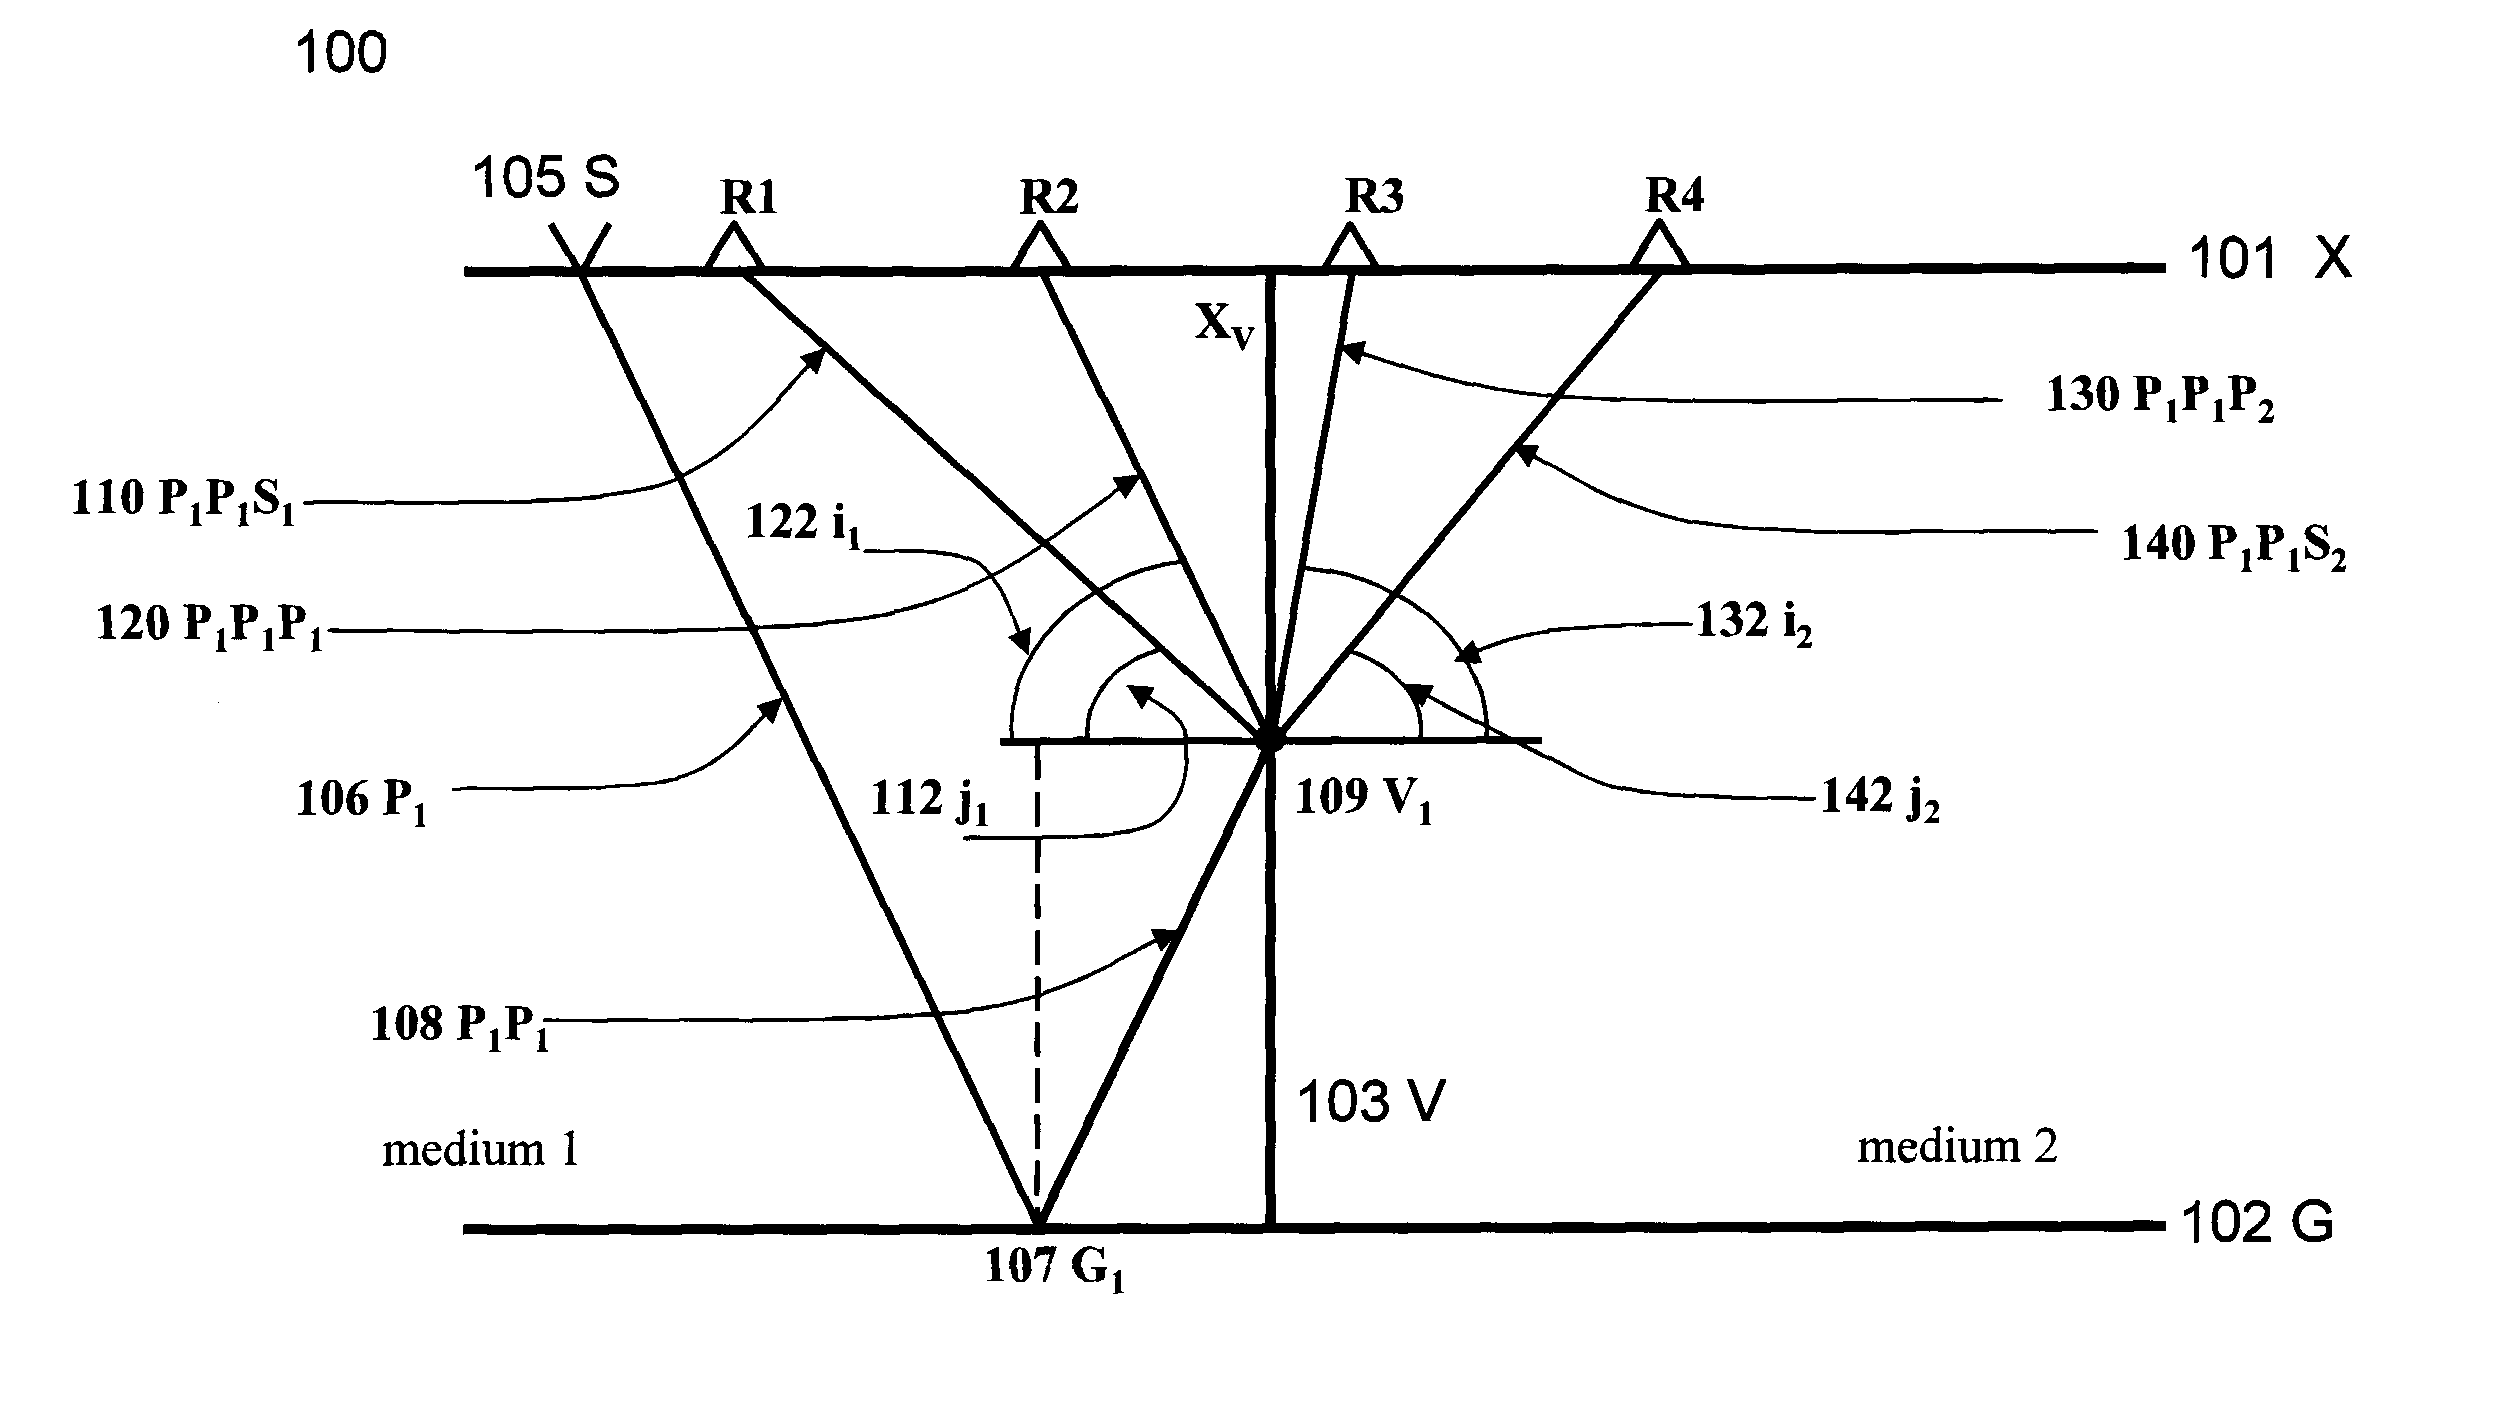 Method of surface seismic imaging using both reflected and transmitted waves